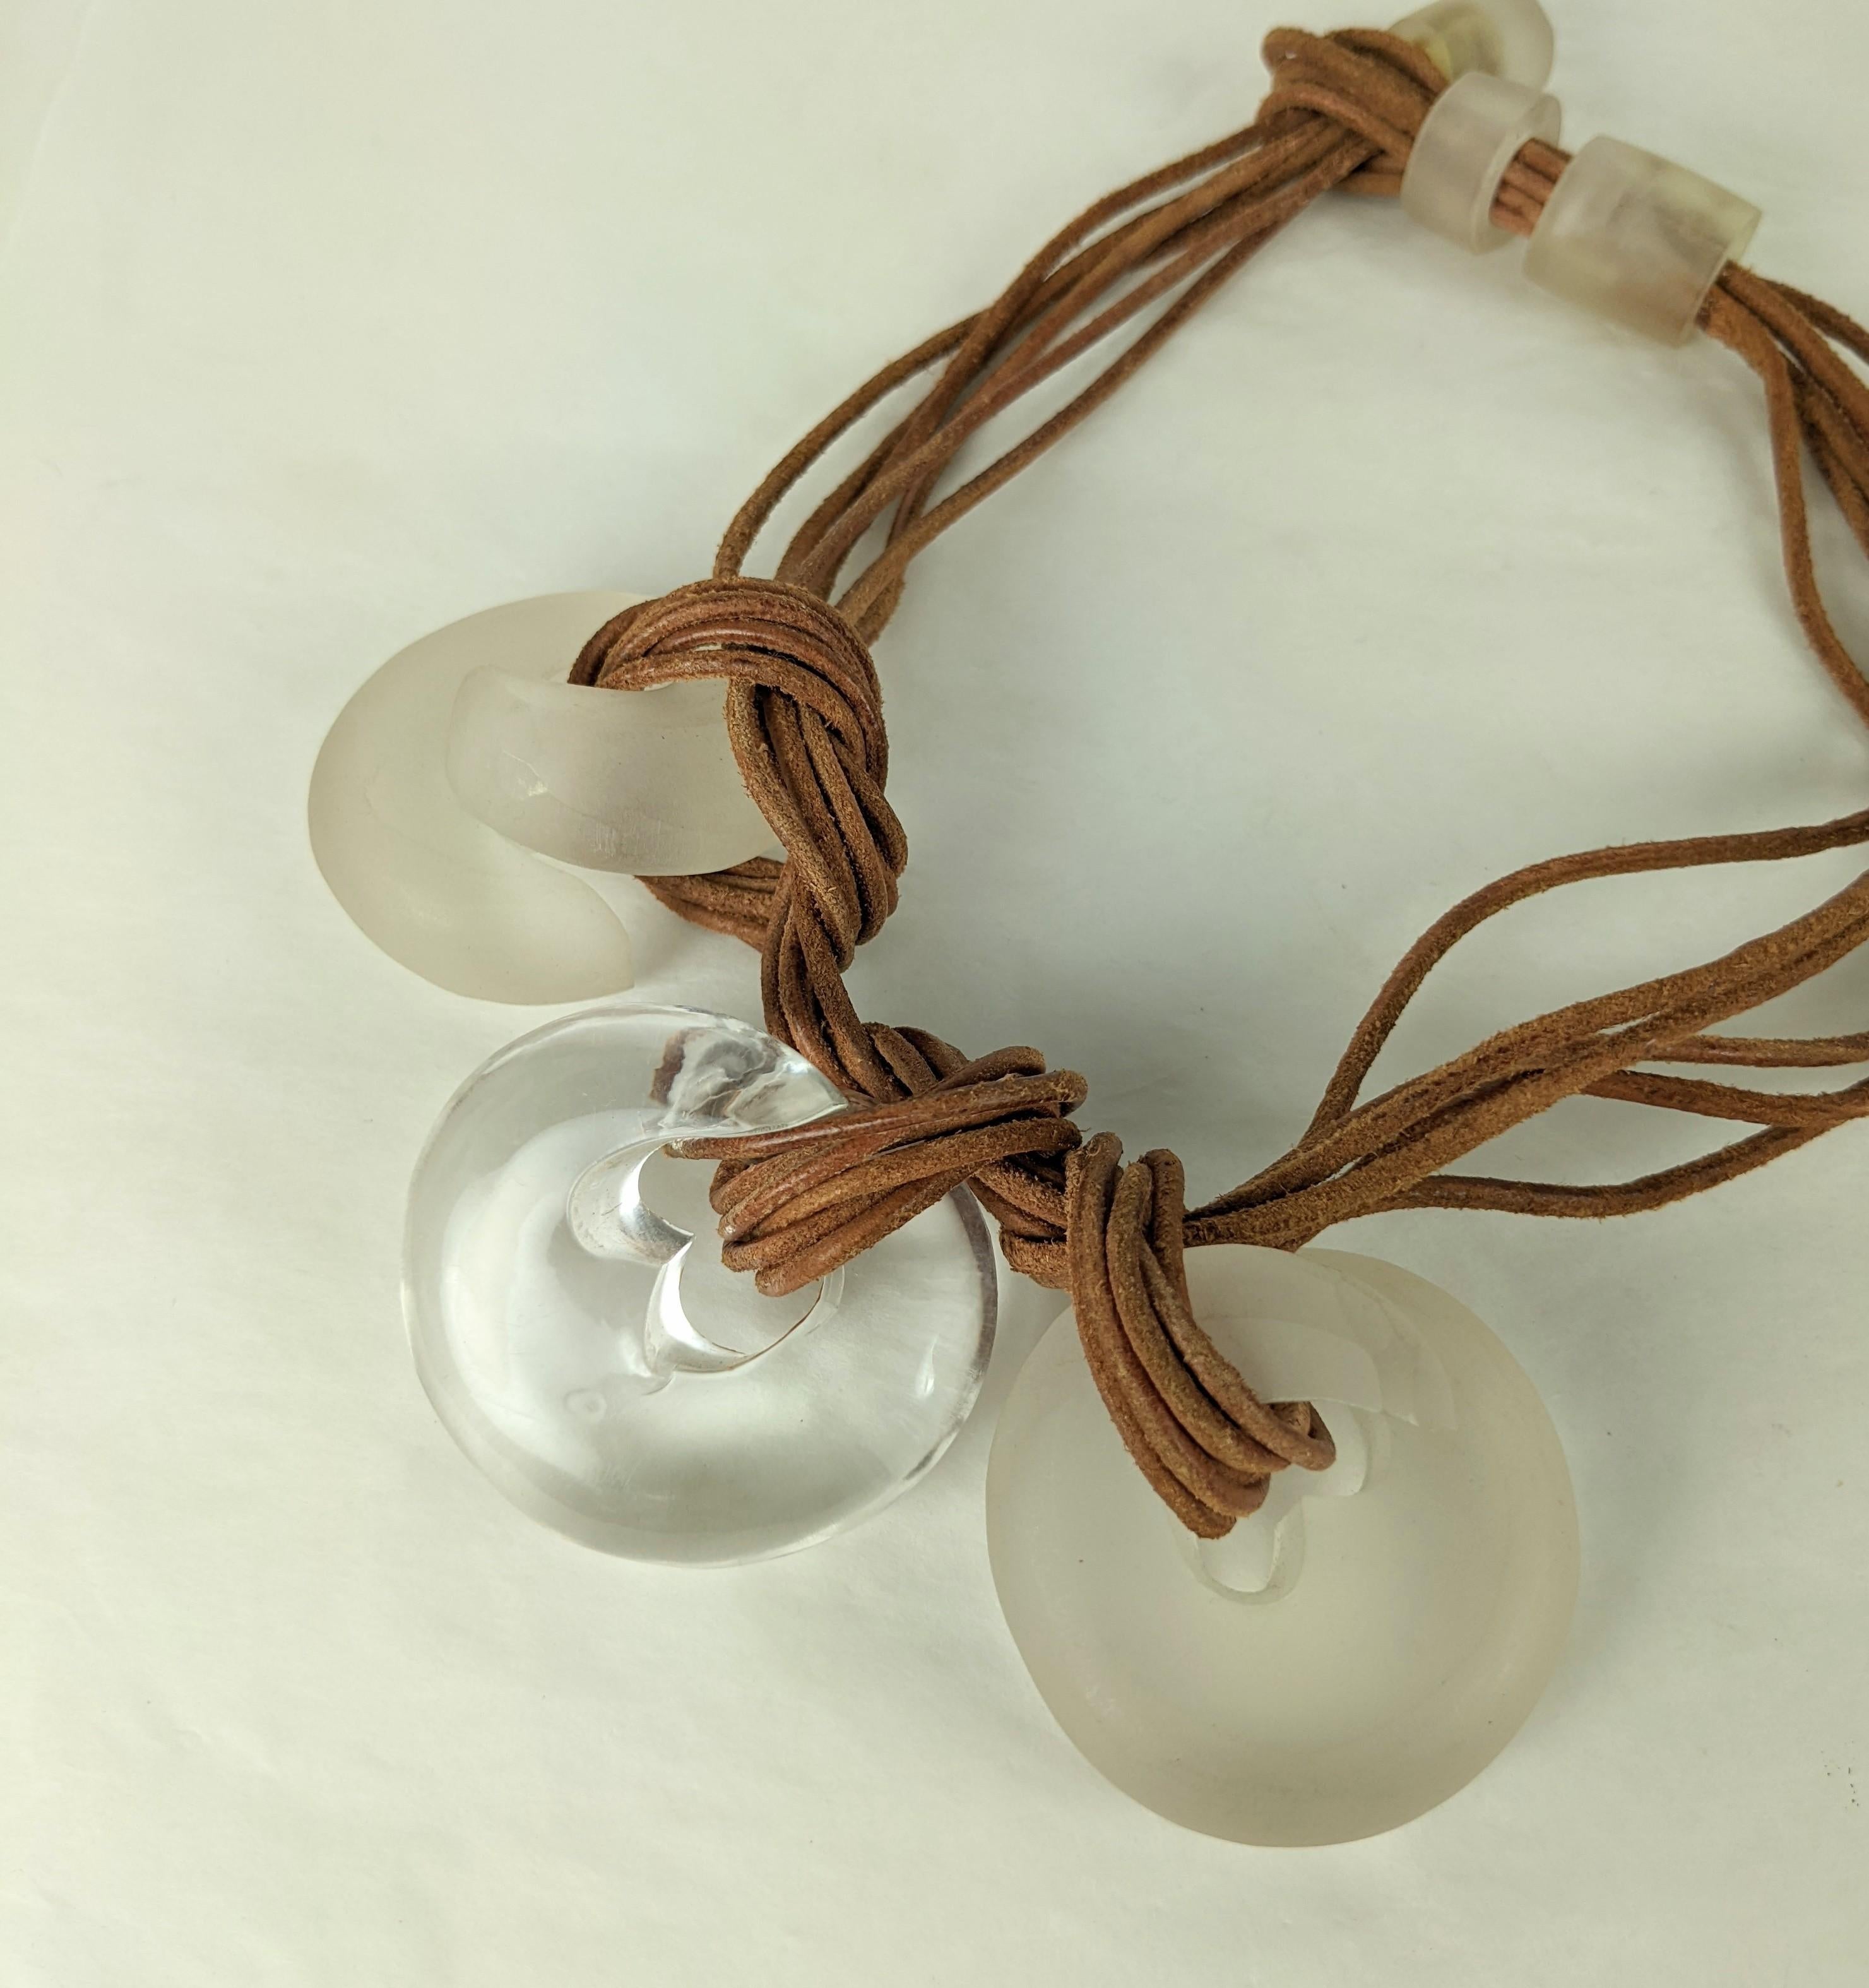 rawhide necklace